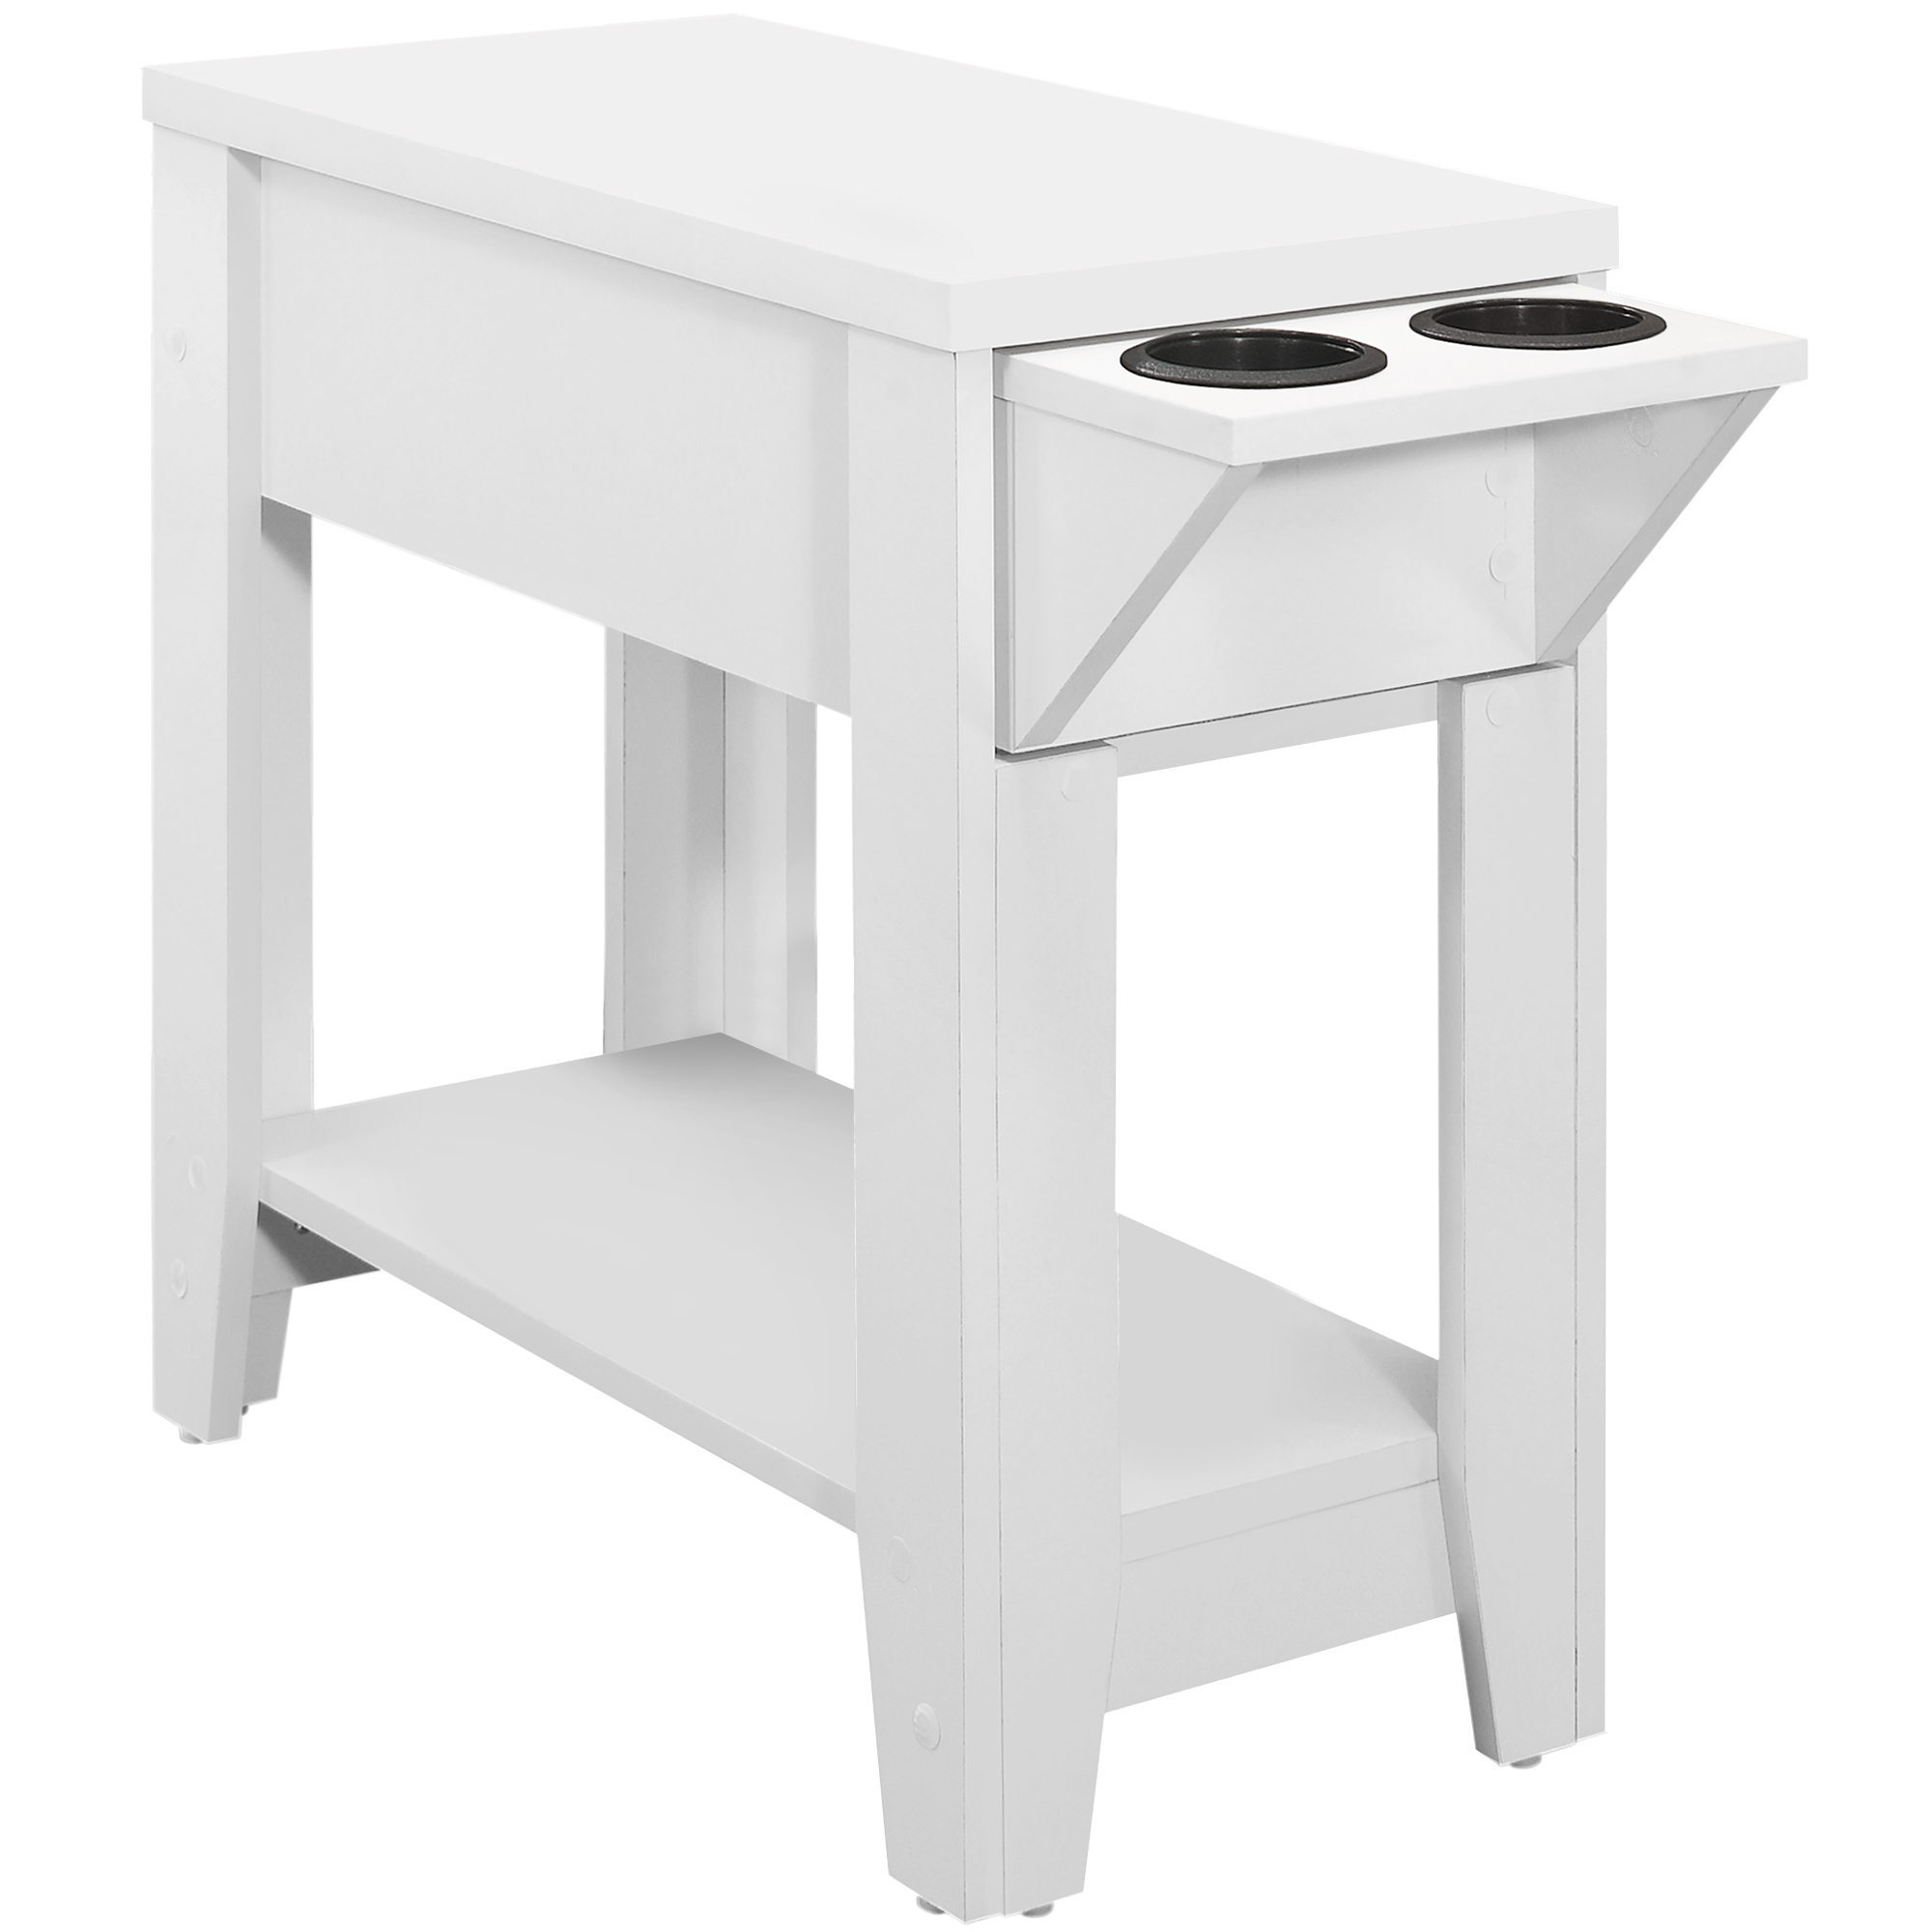 24" x 11.5" x 24" White Finish Hollow Core Accent Table